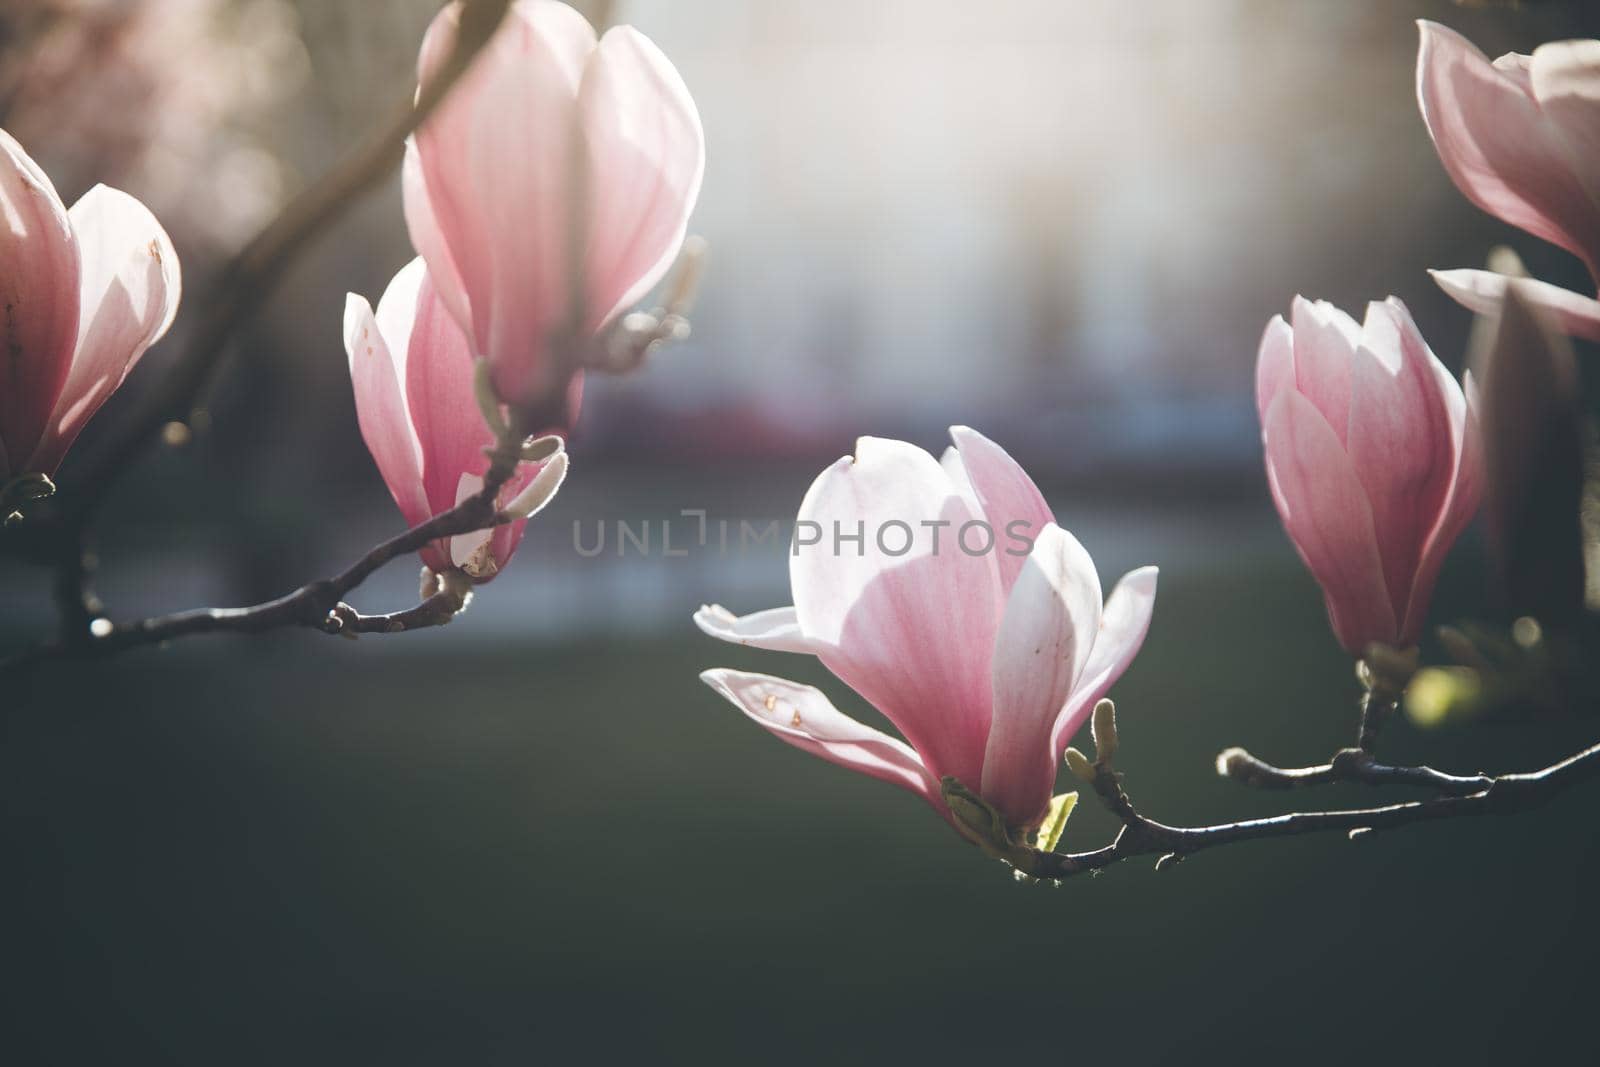 Springtime: Blooming tree with pink magnolia blossoms, beauty by Daxenbichler